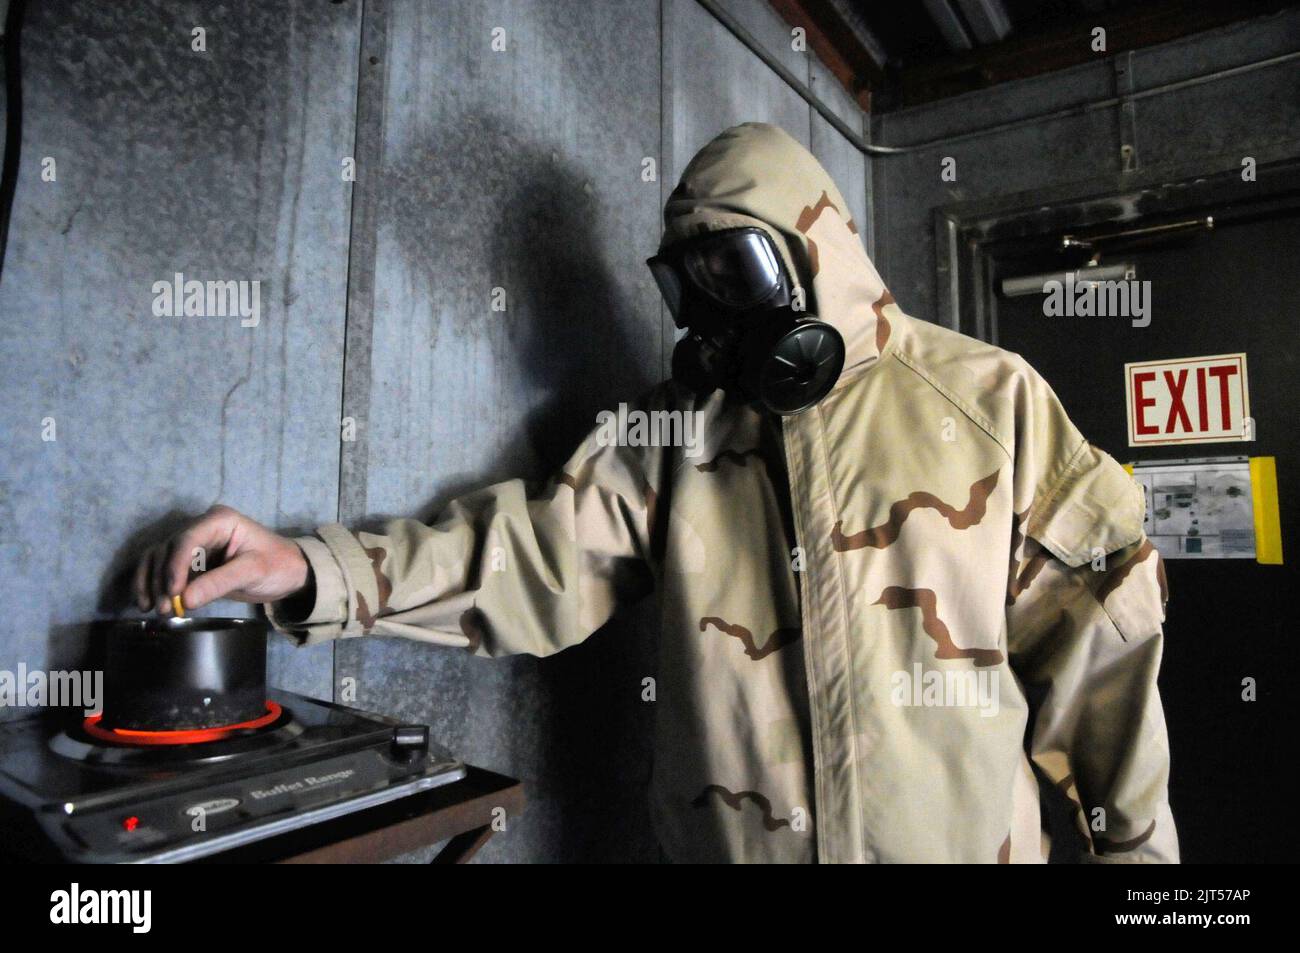 U.S. Navy Equipment Operator 2nd Class a Sailor with Naval Mobile Construction Battalion 5, activates CS gas during a gas mask training exercise in the confidence chamber at the Naval Construction 110224 Stock Photo